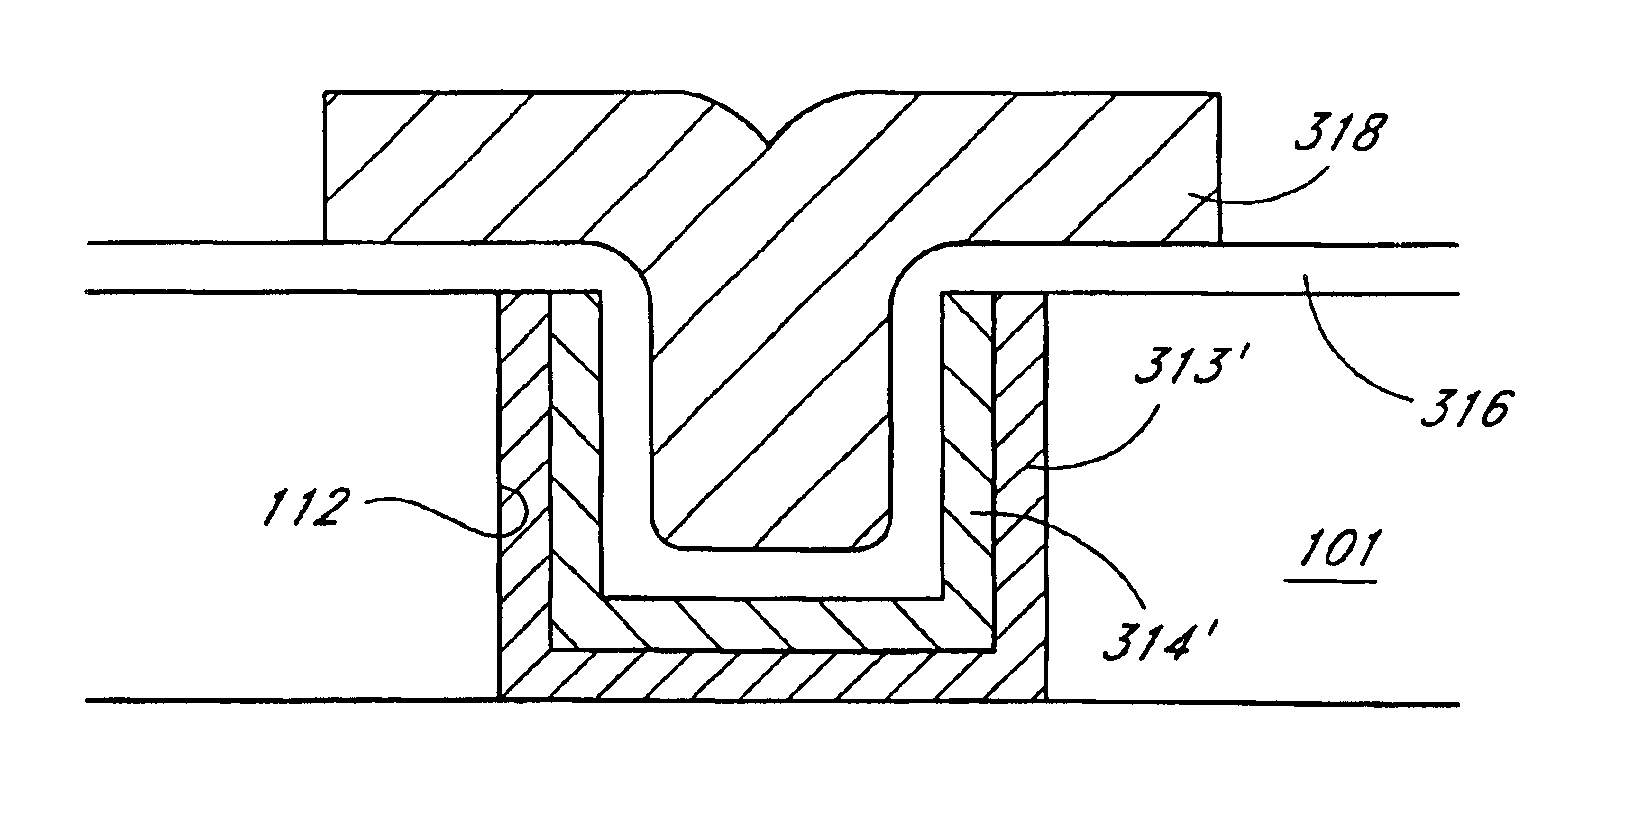 Integrated capacitors fabricated with conductive metal oxides